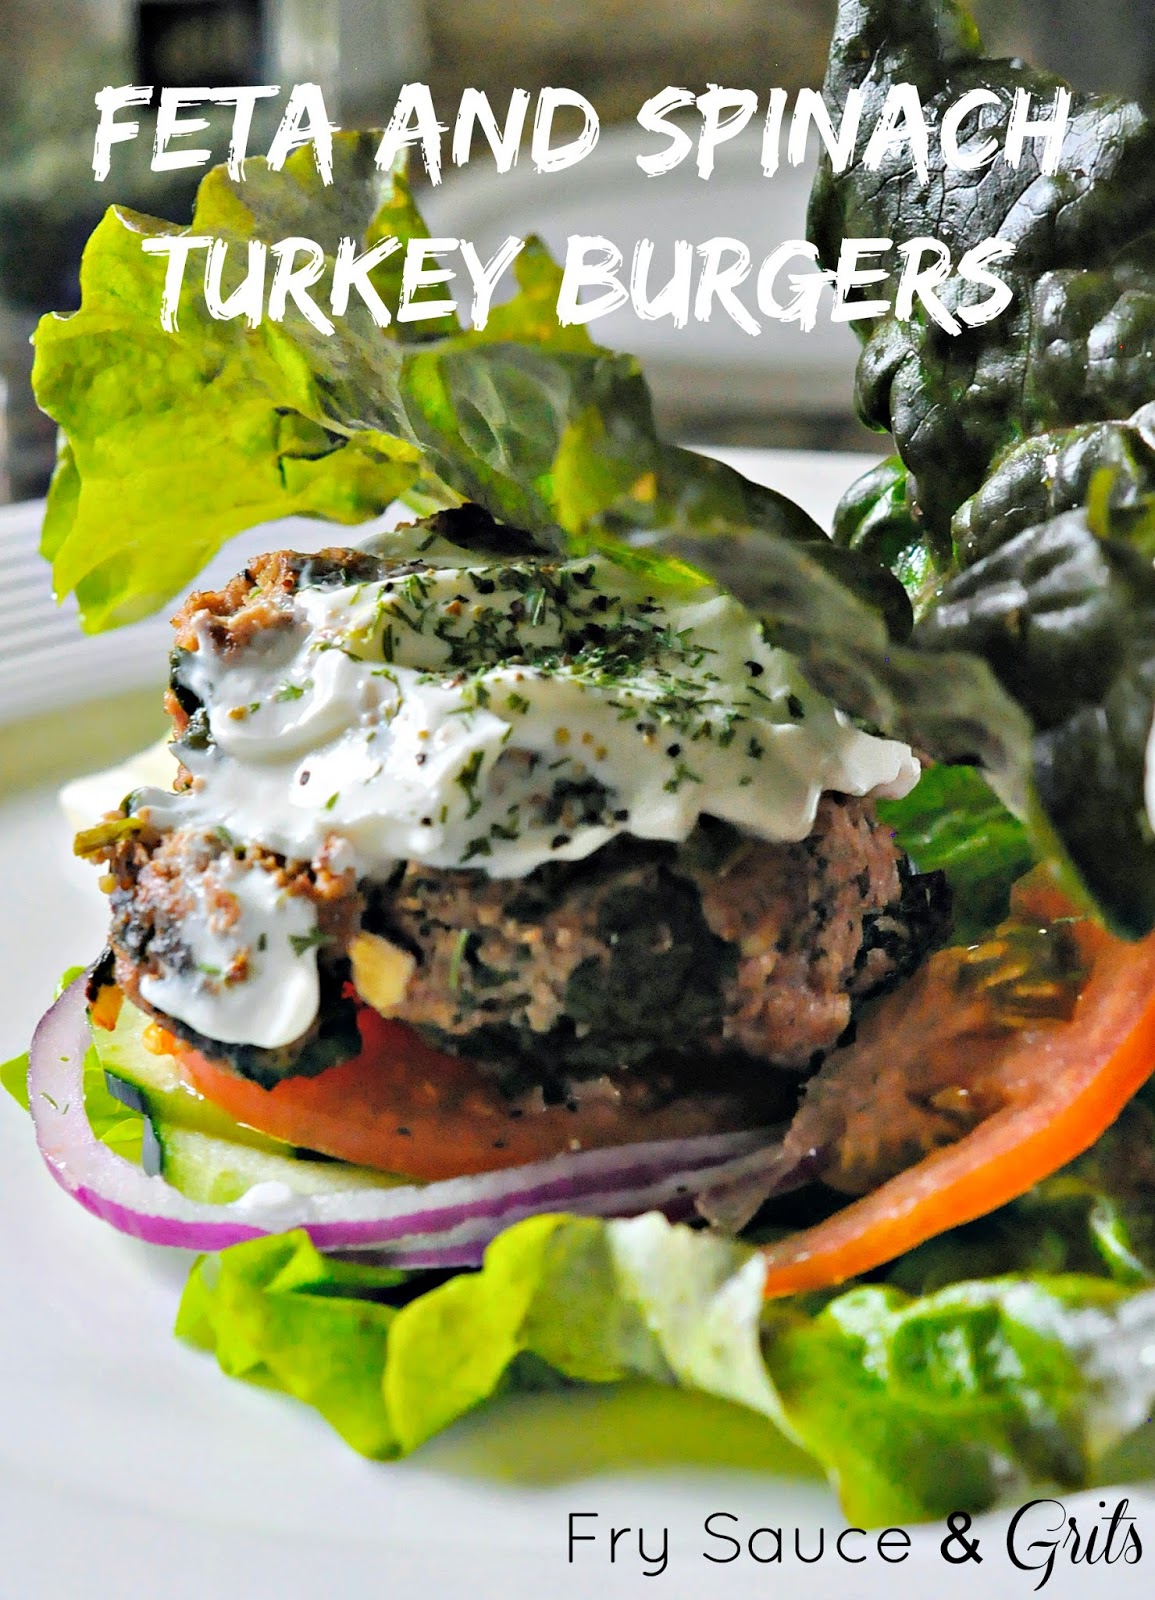 Feta and Spinach Turkey Burger Recipe from Fry Sauce and Grits